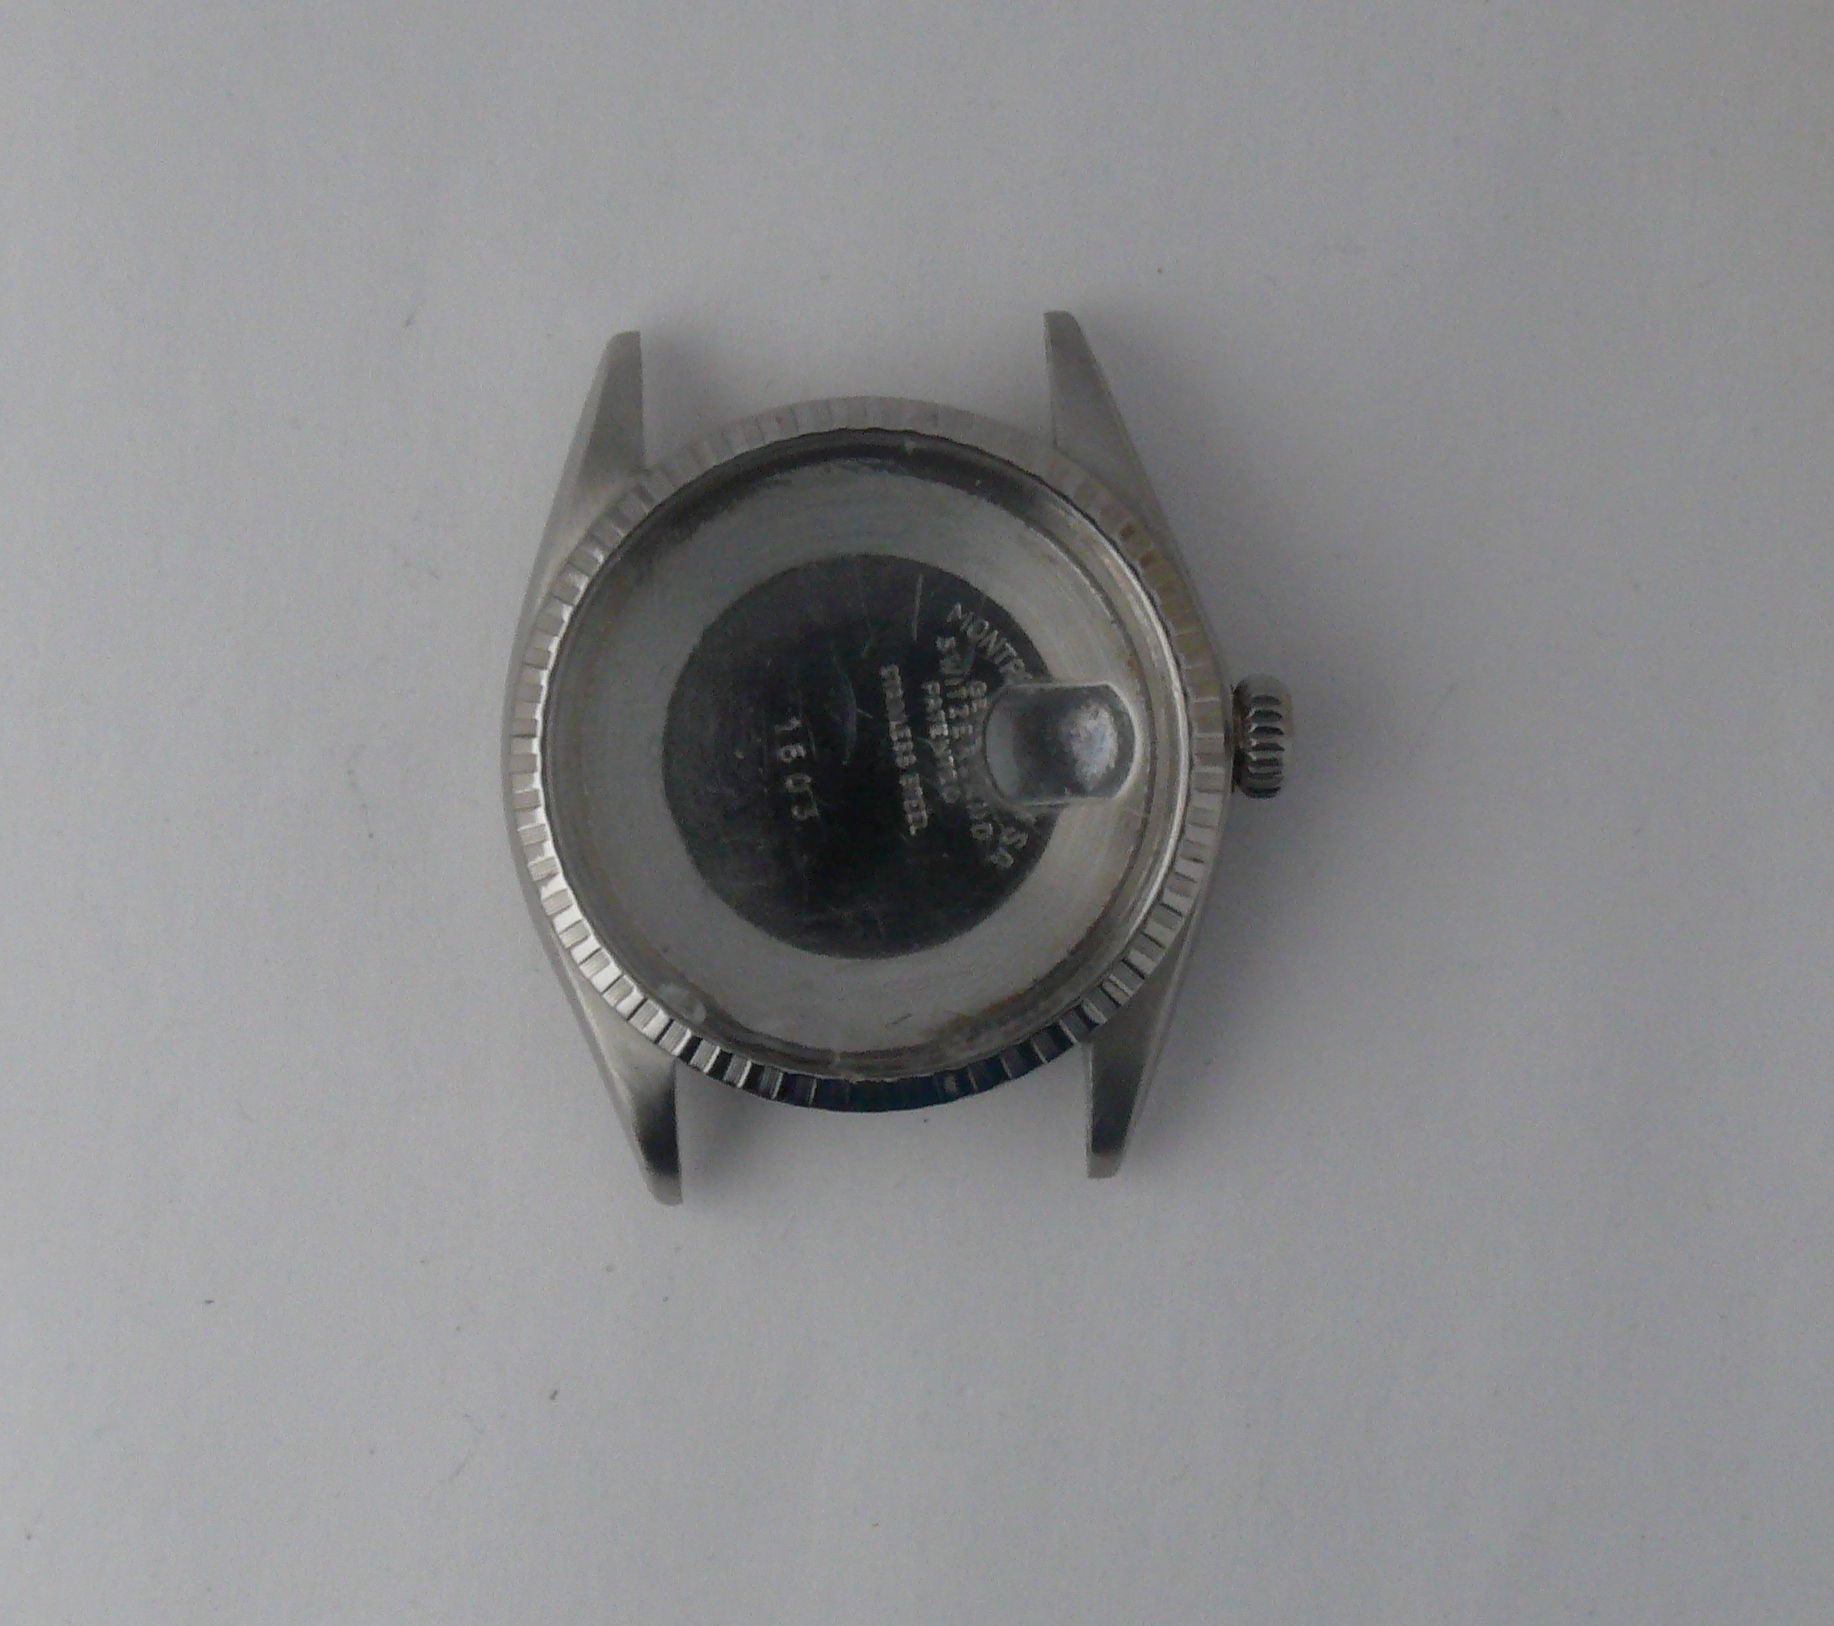 1970s Vintage Rolex Datejust Model ref 1603 case serial 3.29m, corrosion free, comes complete with